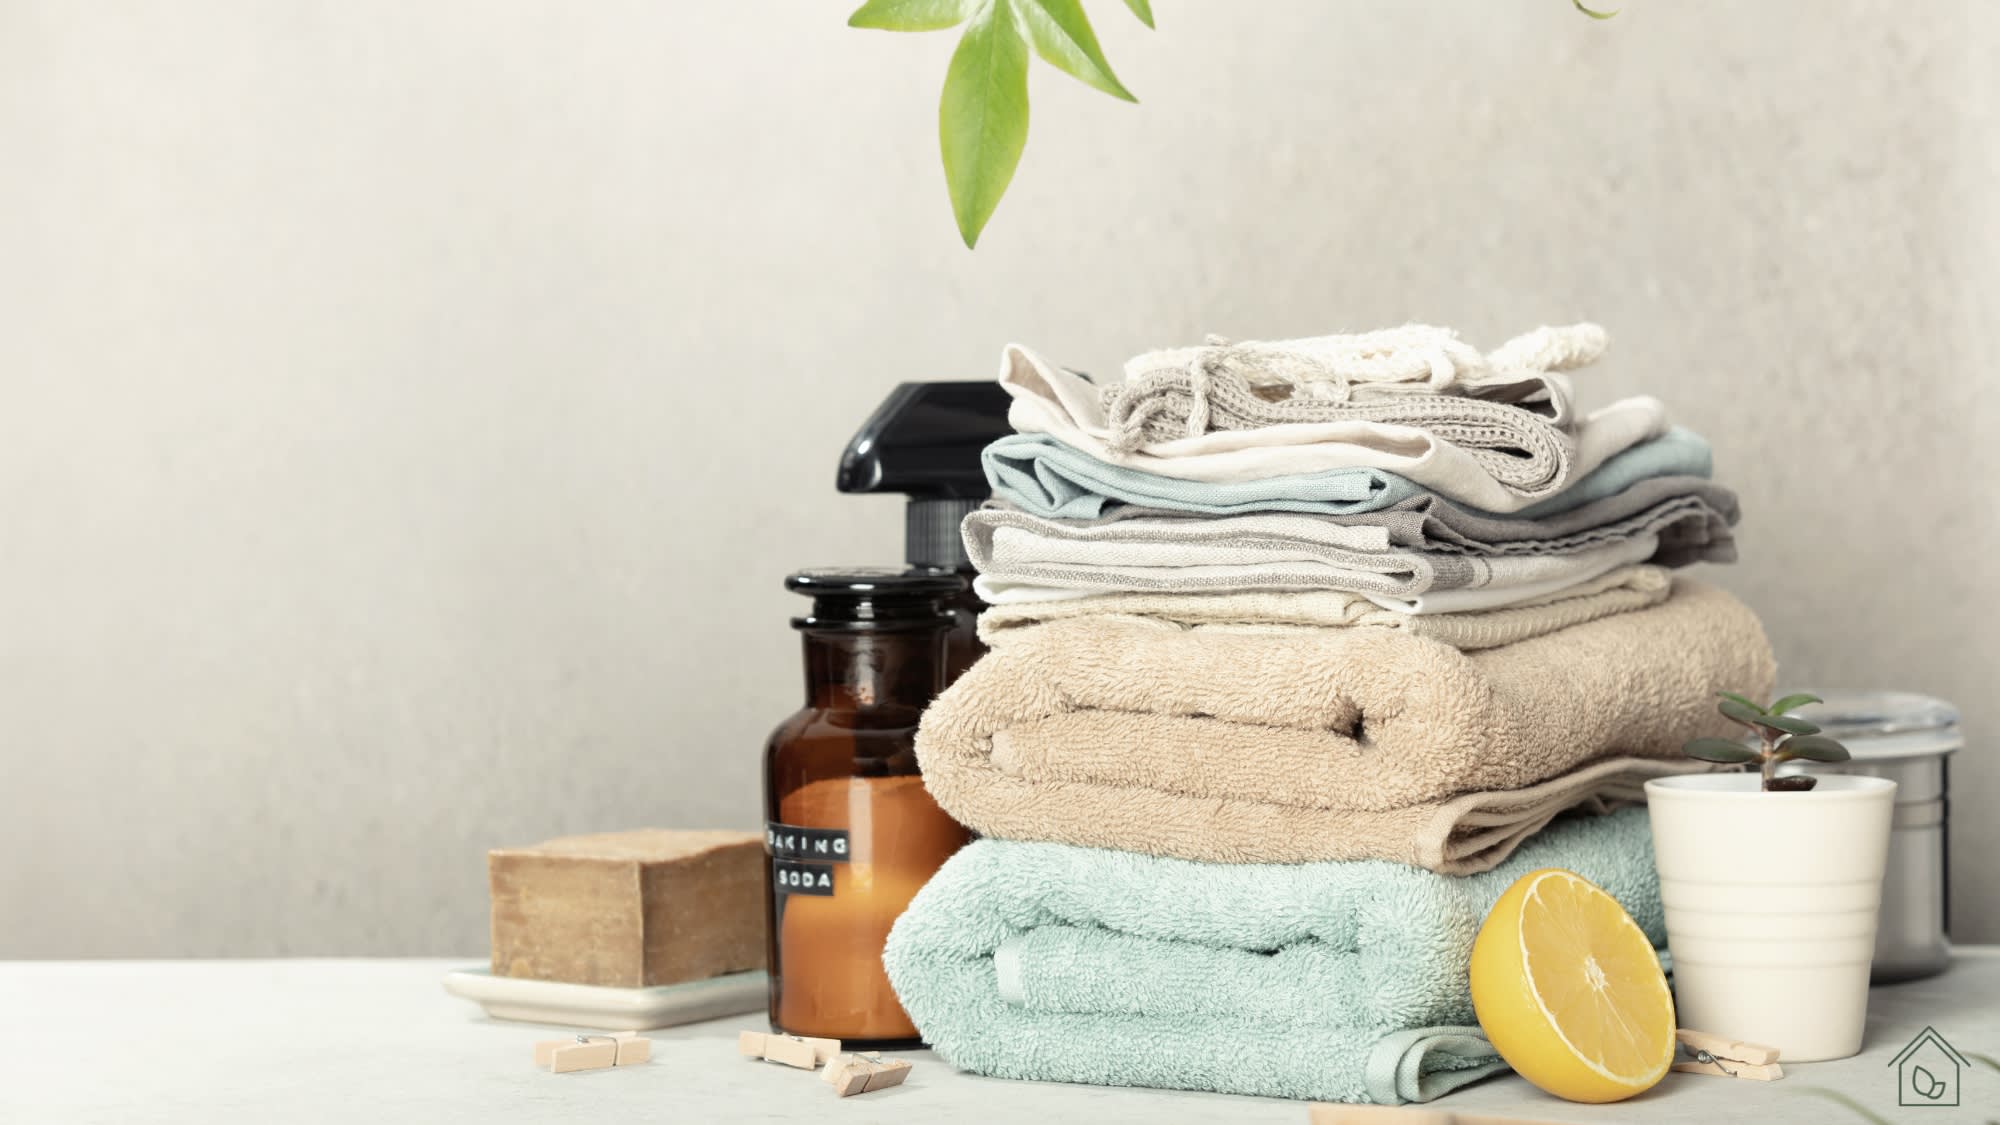 9 Best Laundry Detergent Sheets According To Reviews - The Eco Hub